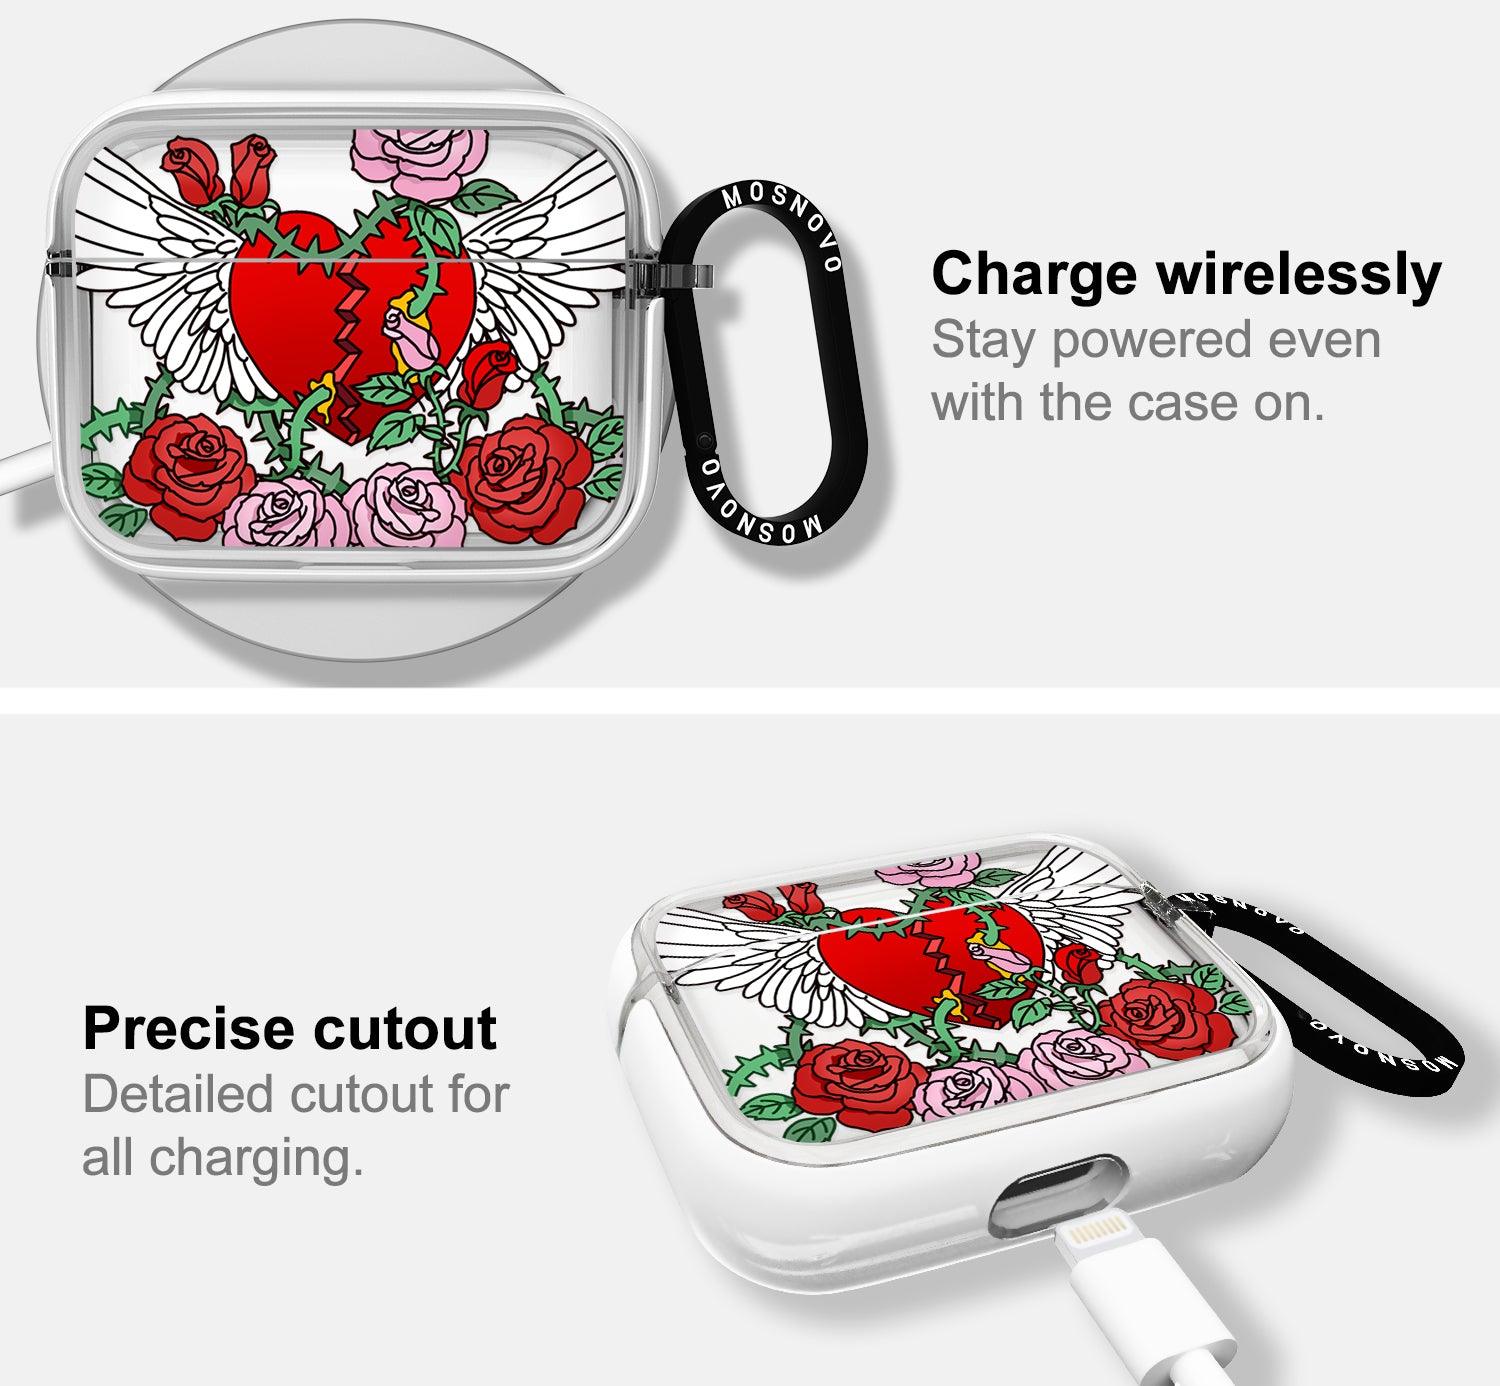 Wing Heart AirPods Pro Case - MOSNOVO